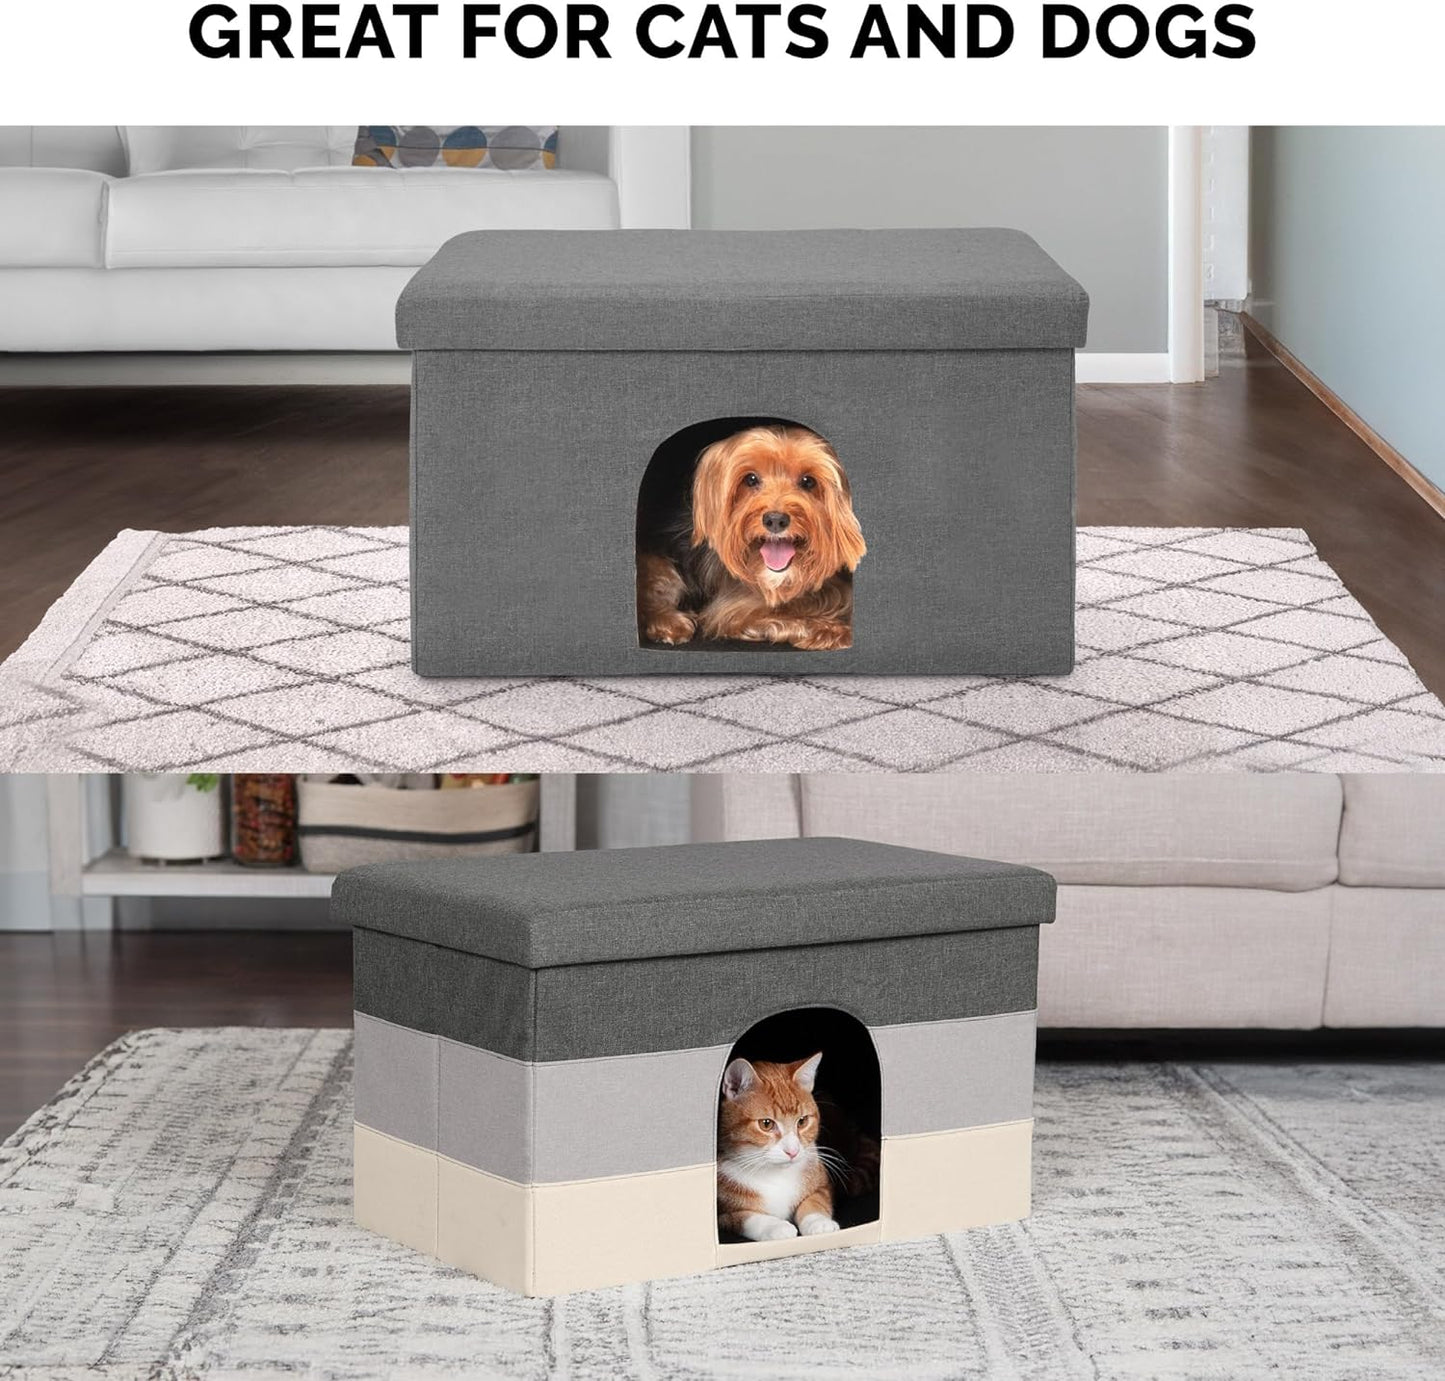 Pet House for Indoor Cats & Medium/Small Dogs, Collapsible & Foldable W/ Plush Ball Toy - Living Room Ottoman Cat Condo - Hygge Stripe (Gray/Cream), Large